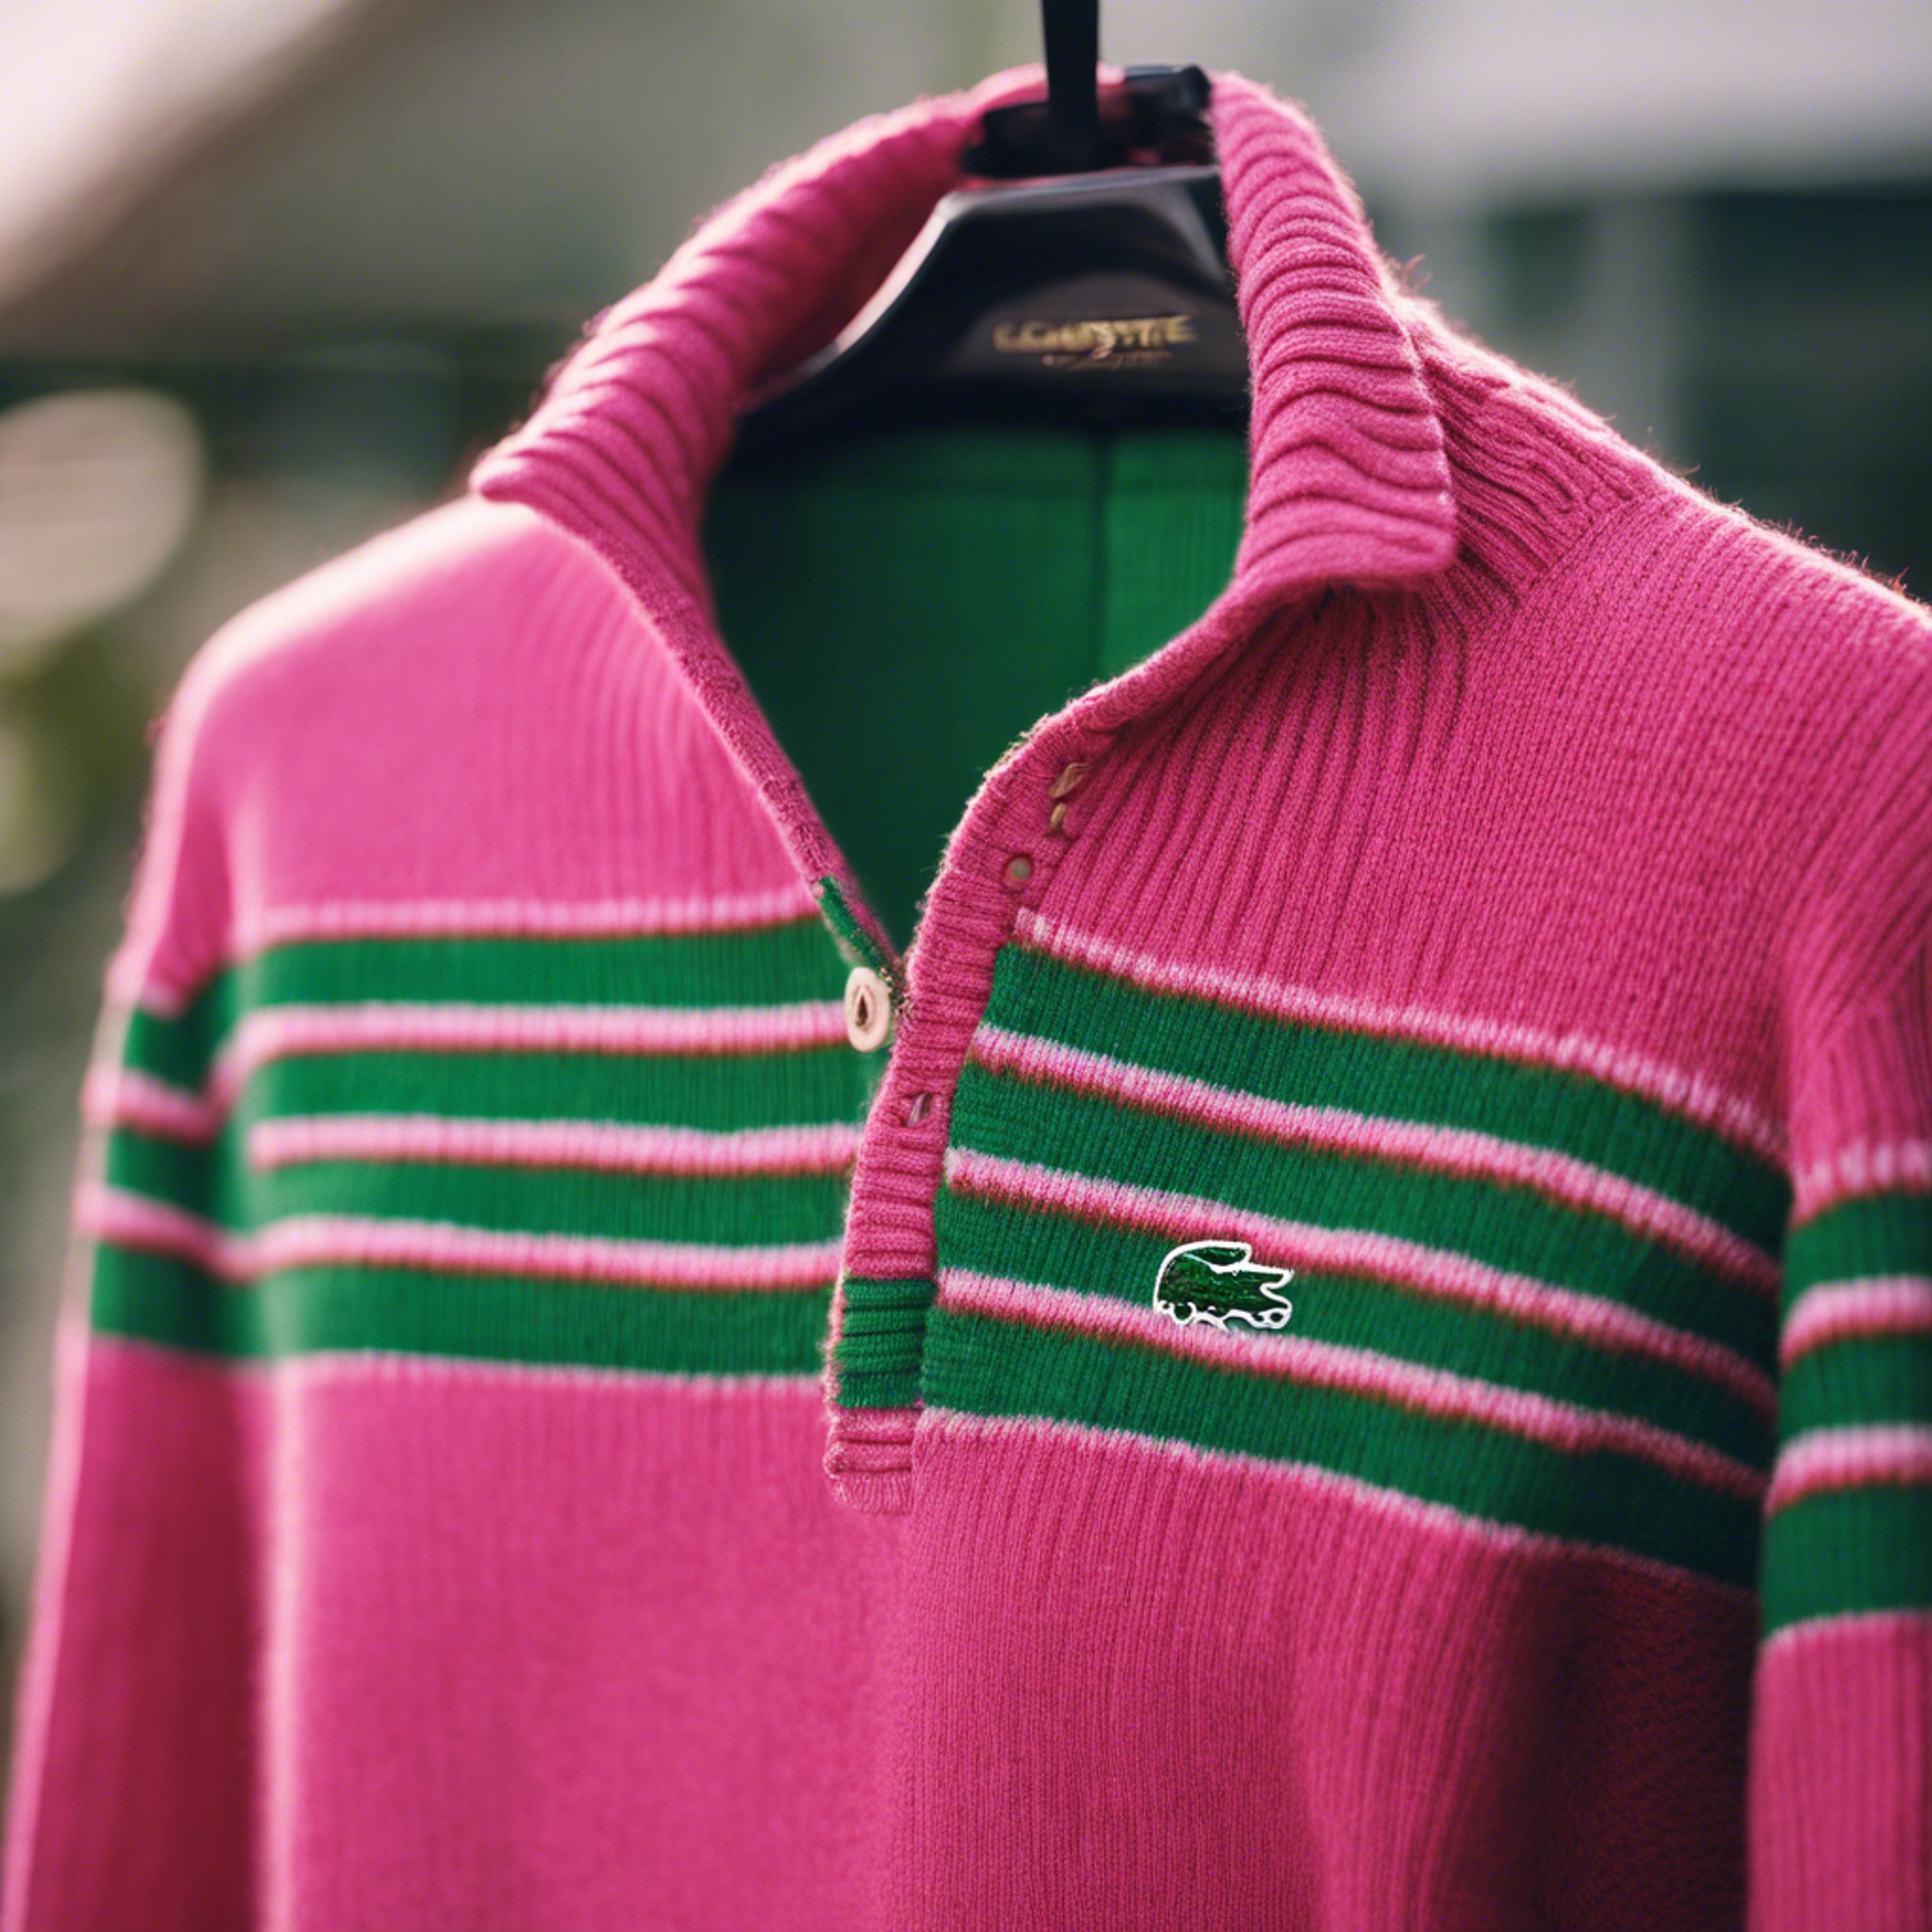 A preppy Lacoste sweater in bright pink and green stripes. Tapeta[46dc671cf42d4e658ddb]